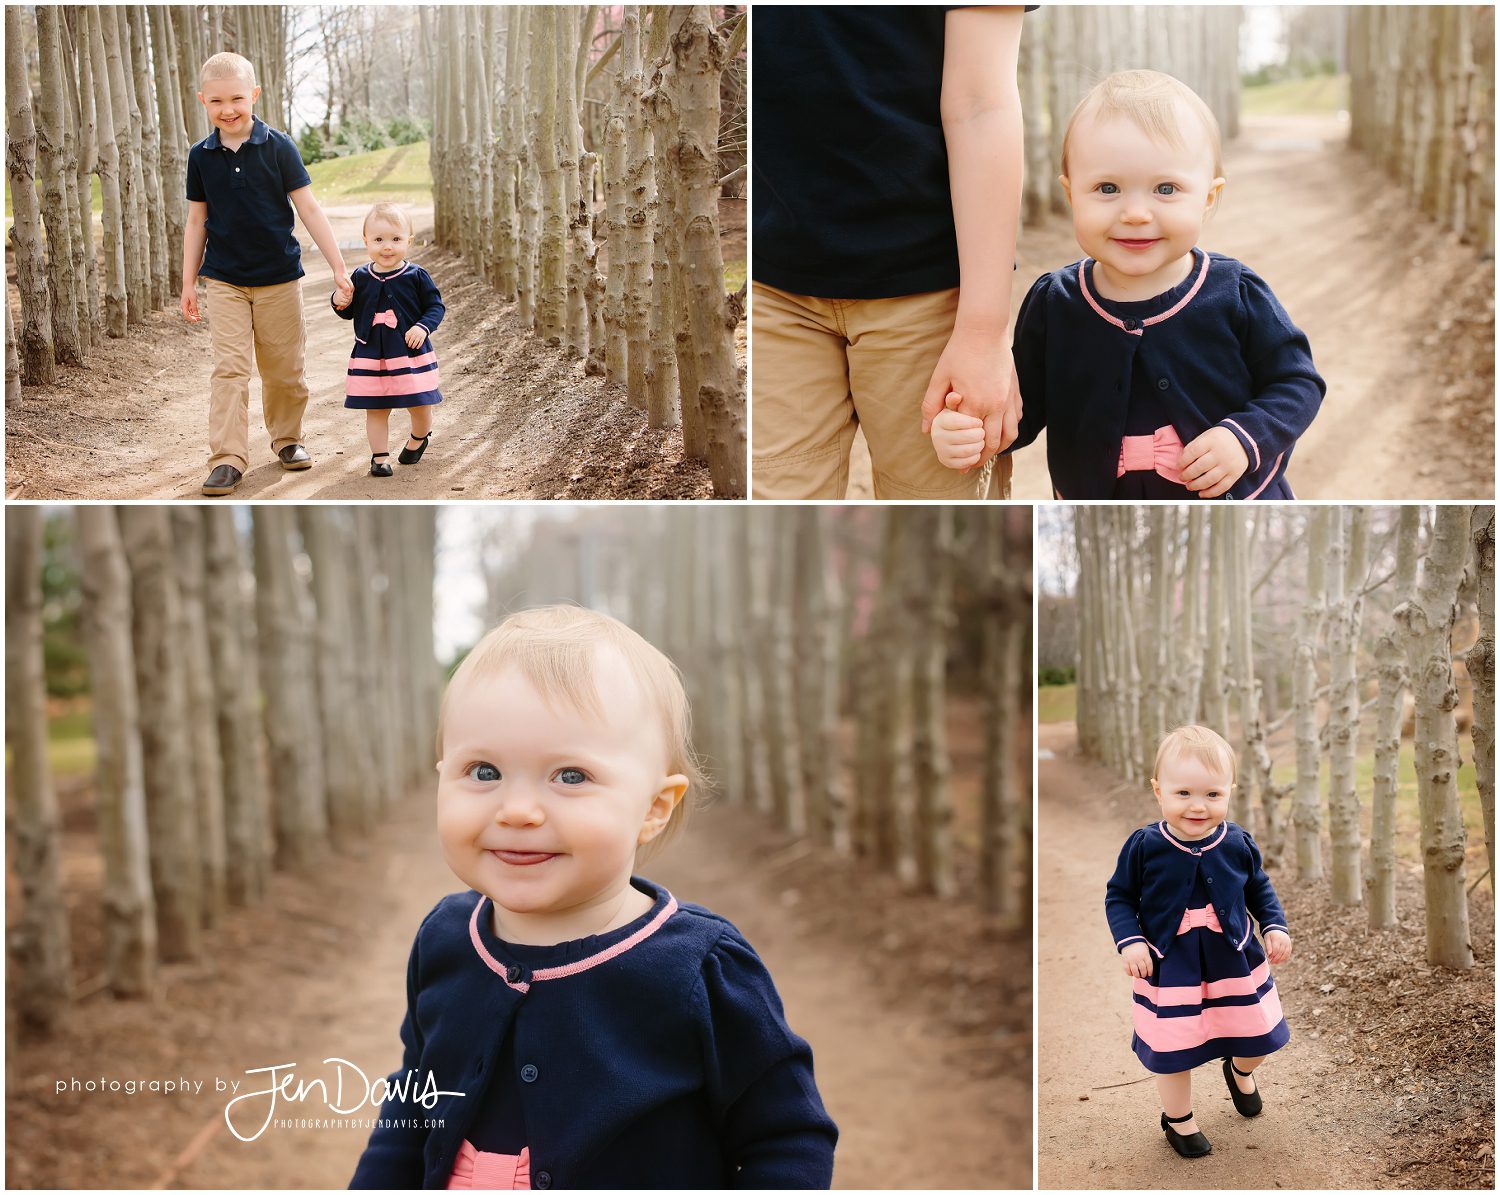 1 year old girl walking with brother smiling in the trees